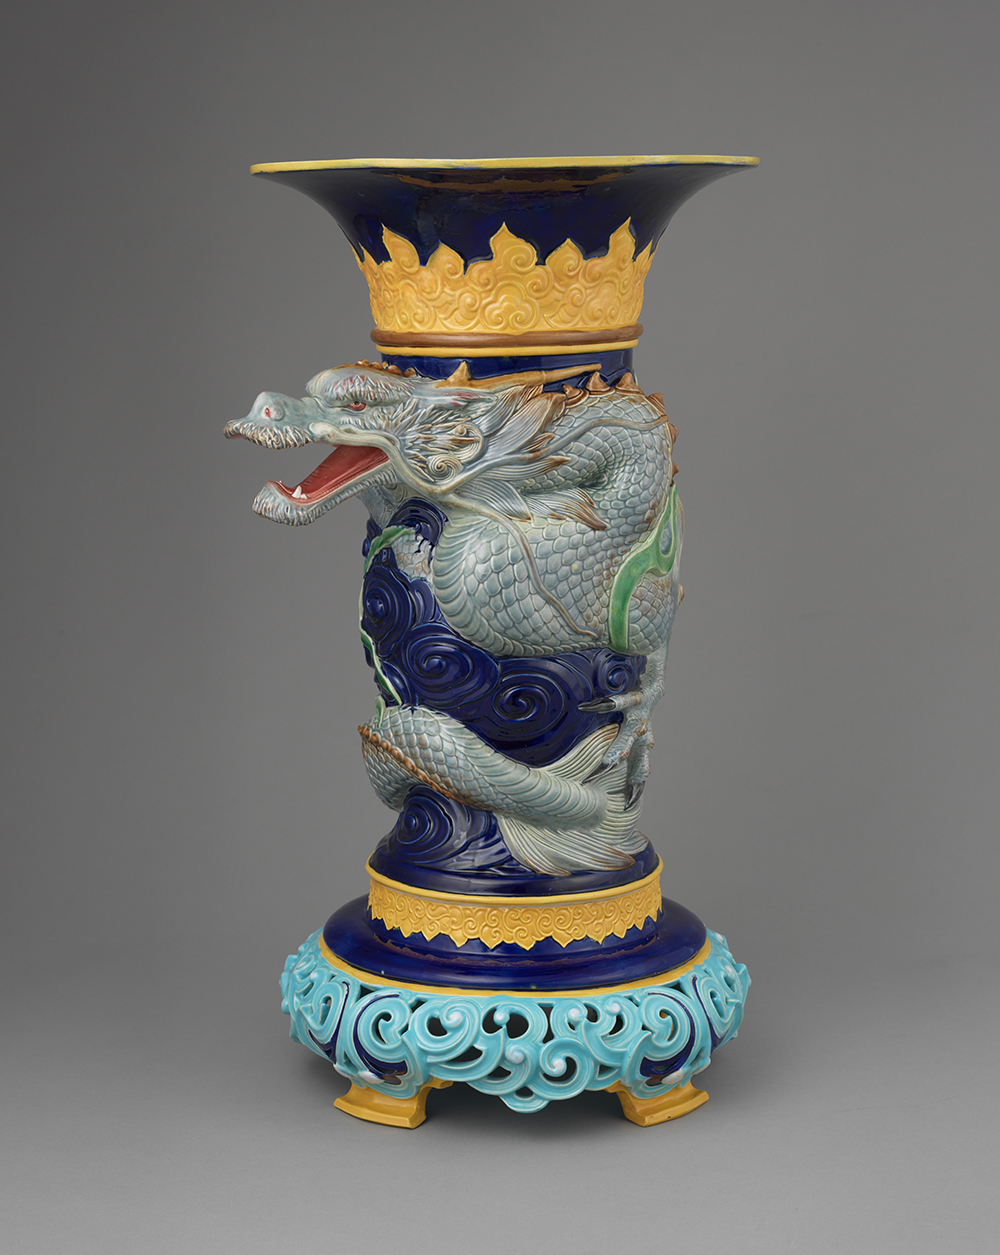 Majolica dark blue ground dragon vase with jade colored dragon, yellow and turquoise detailing, and openwork base.